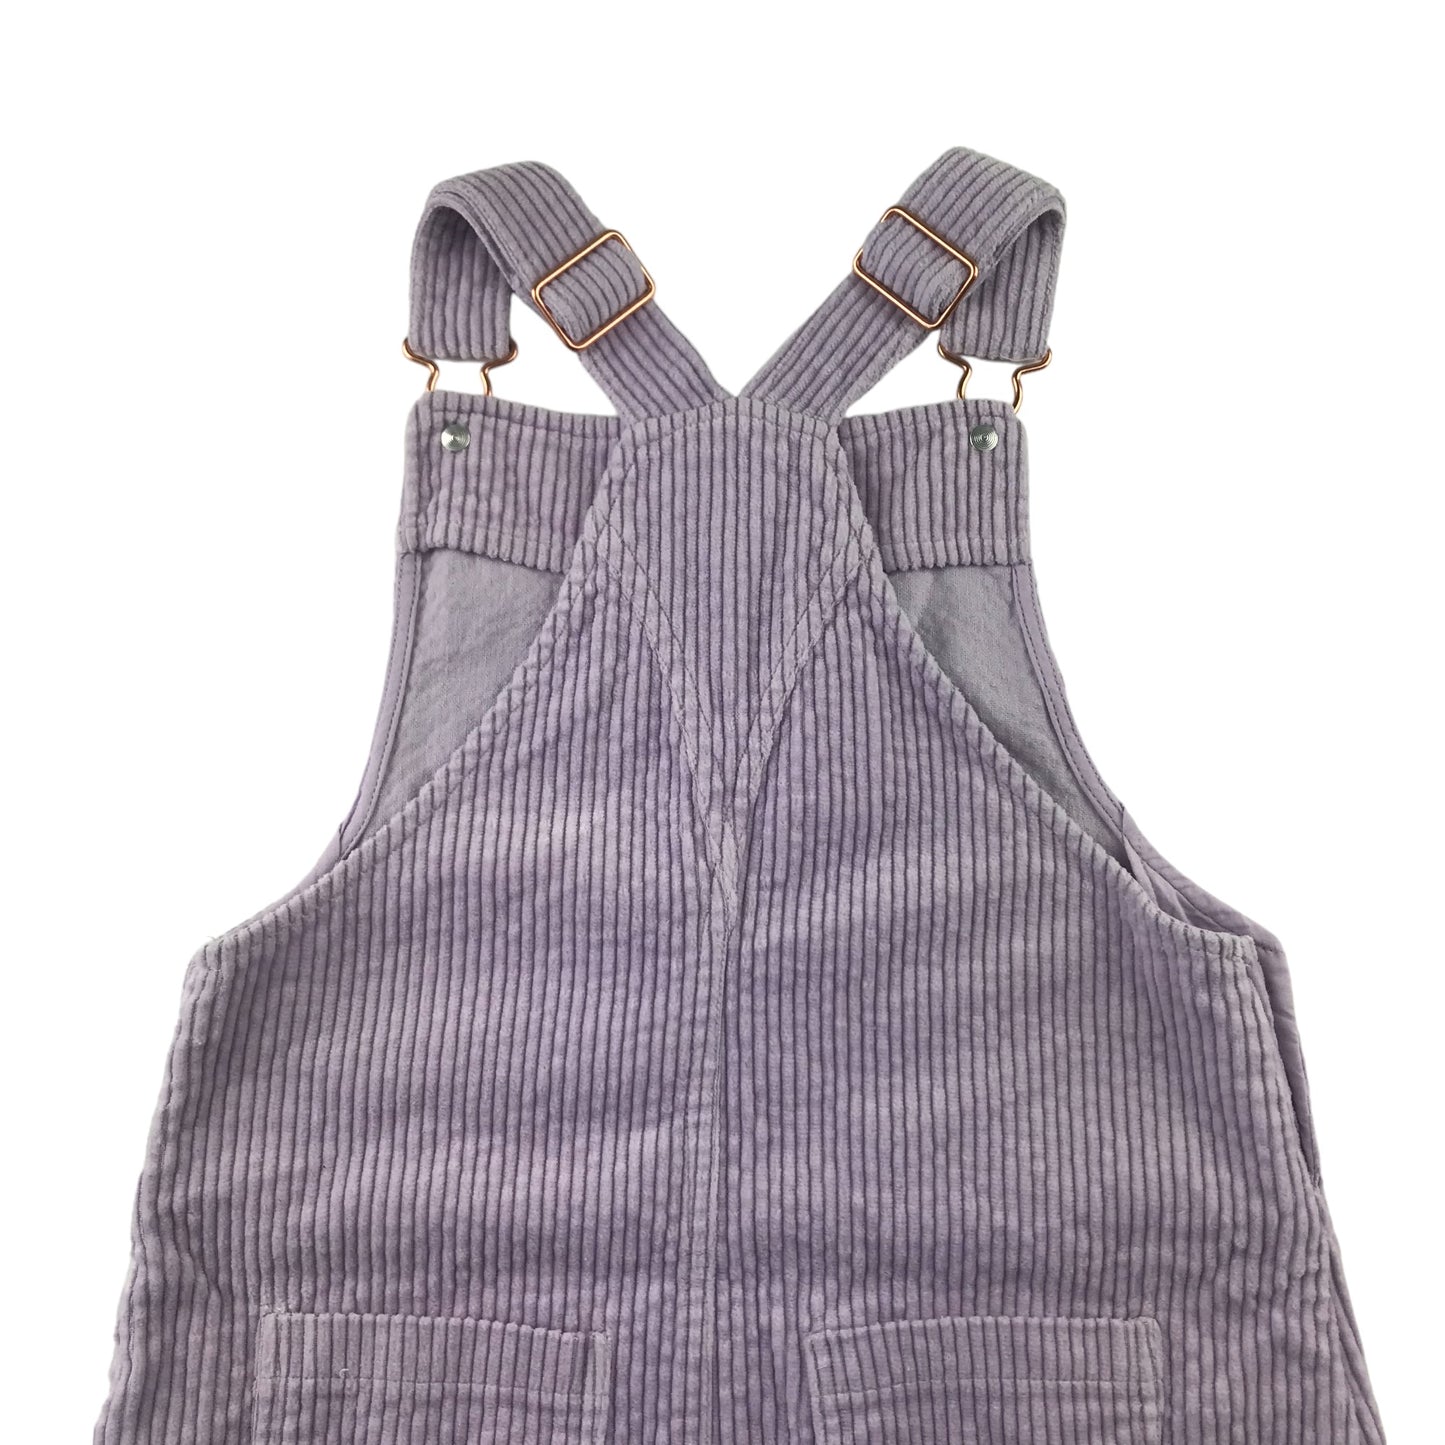 M&S Dress 7-8 years Lilac Corduroy Dungaree Cotton